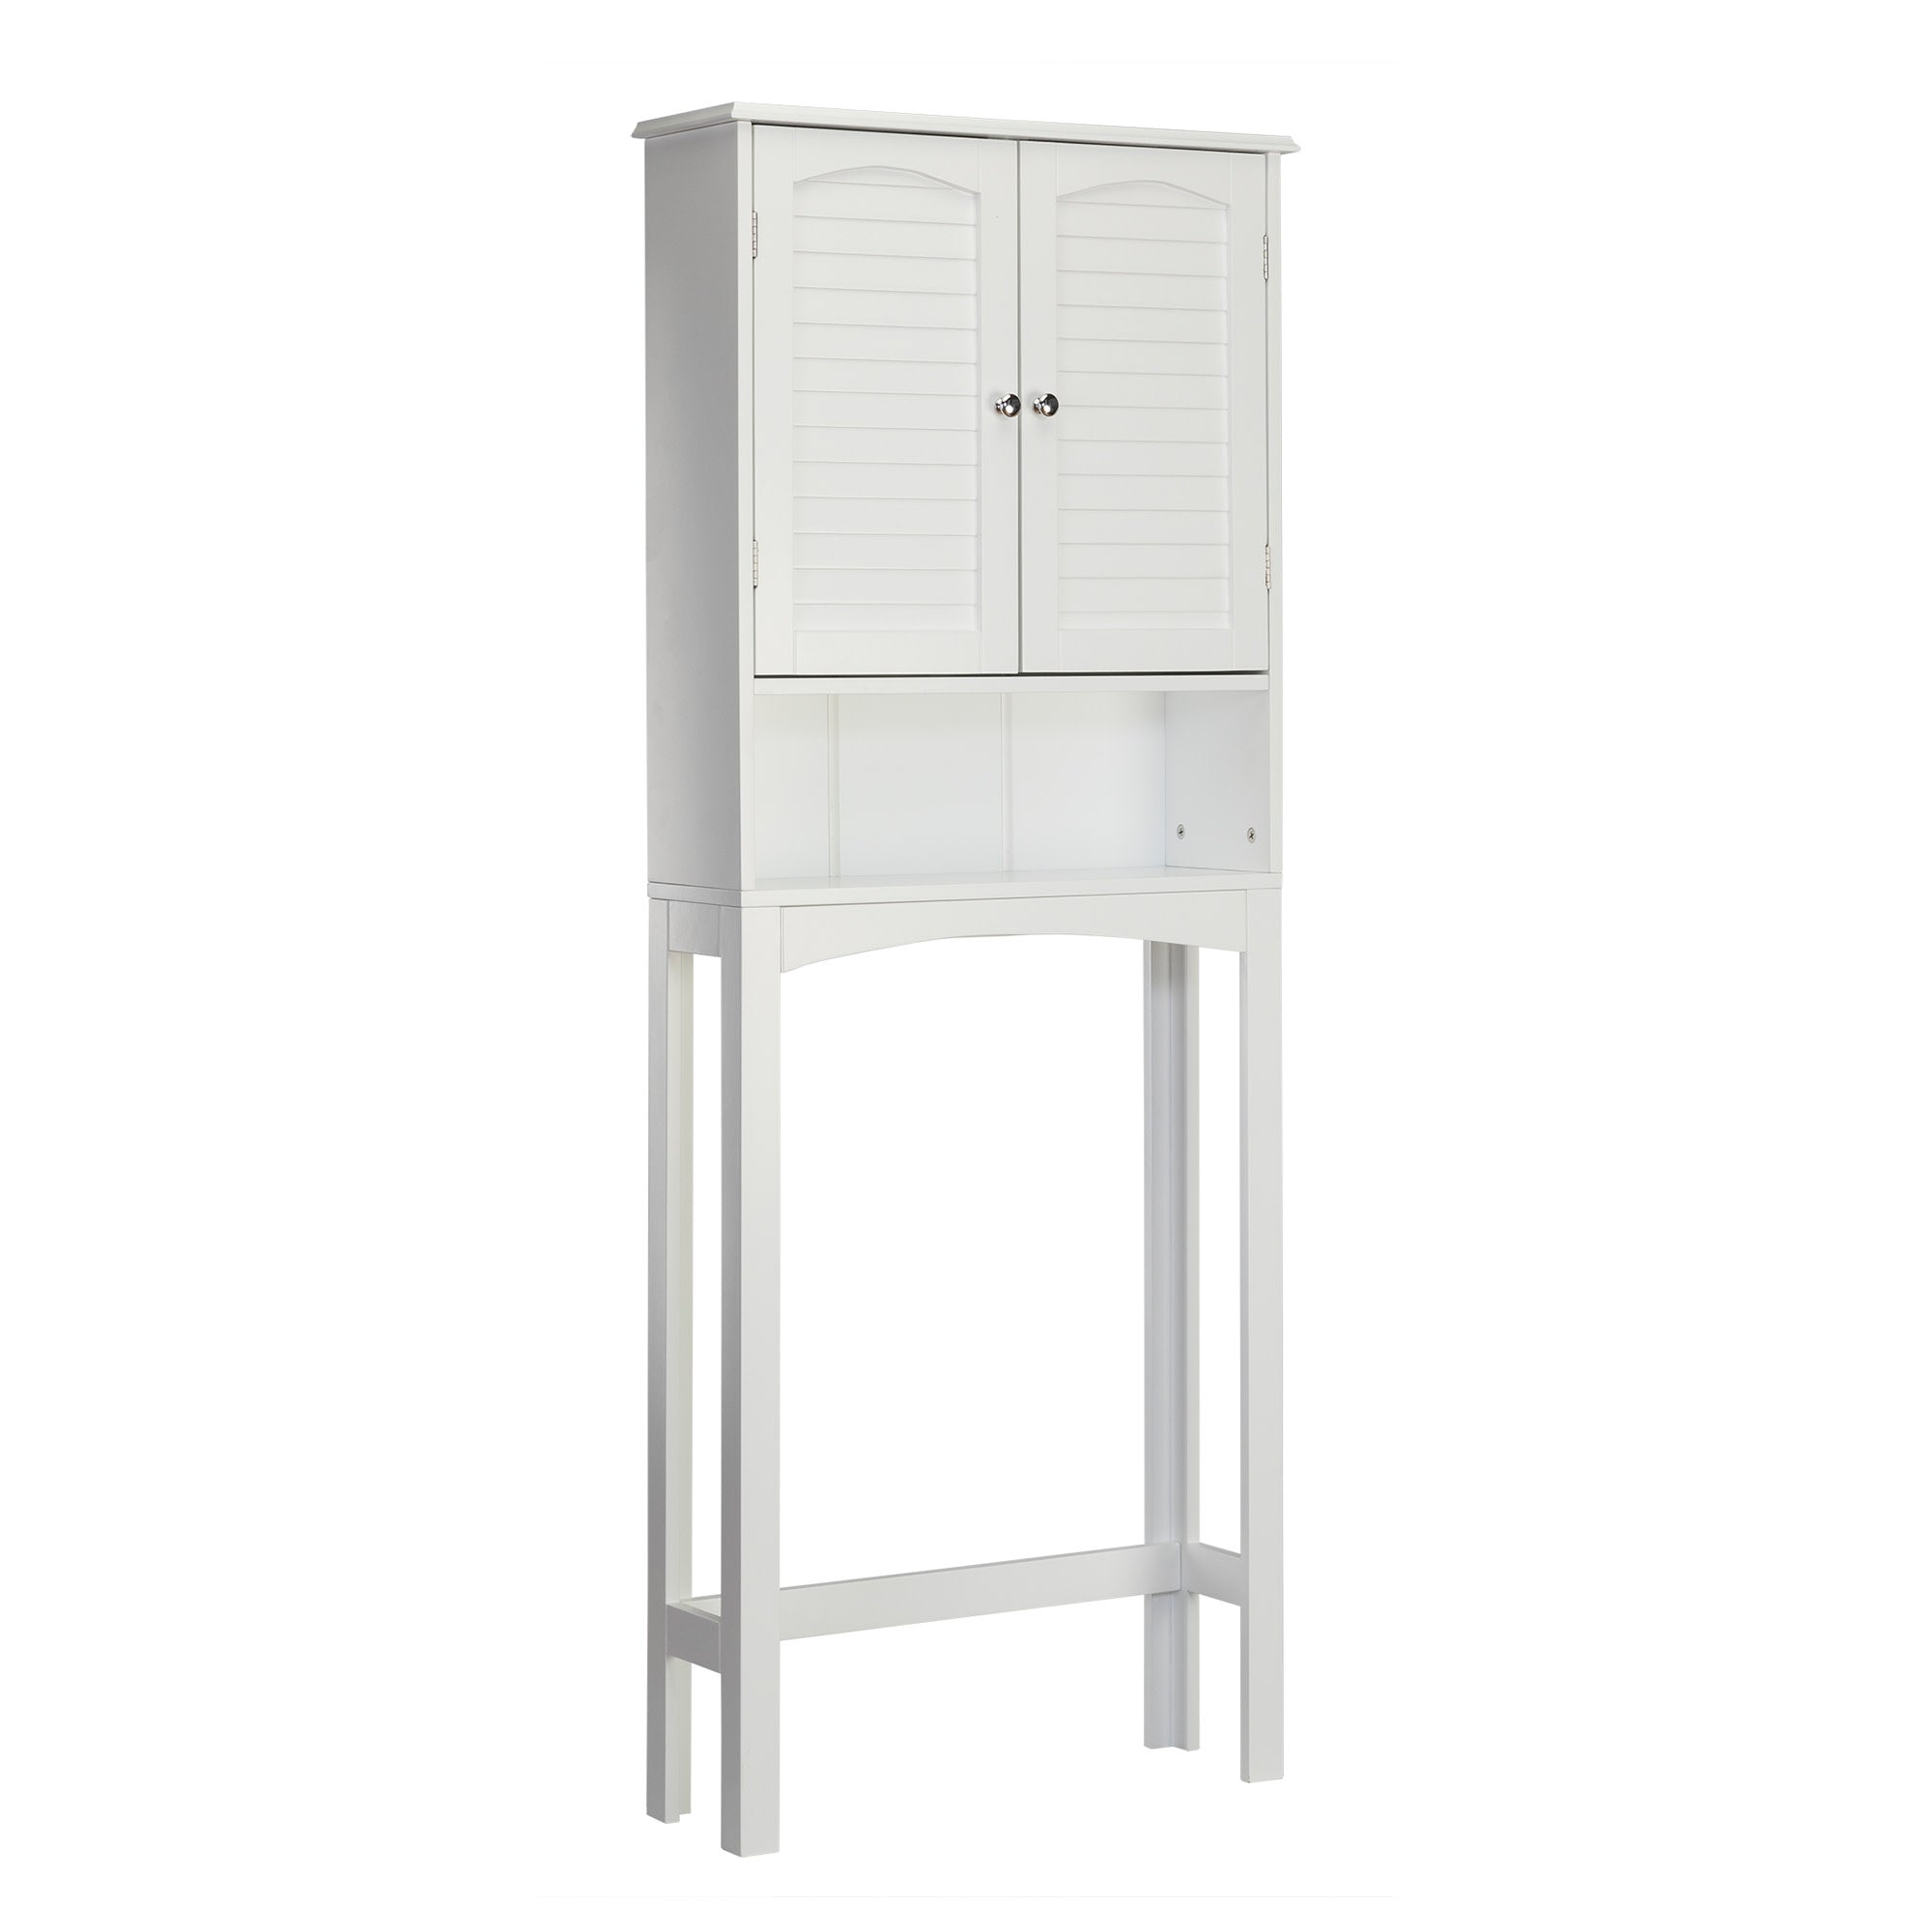 Teamson Home Louis Over-the-Toilet Storage Cabinet with Two Shutter Style Doors and Open Shelf, White